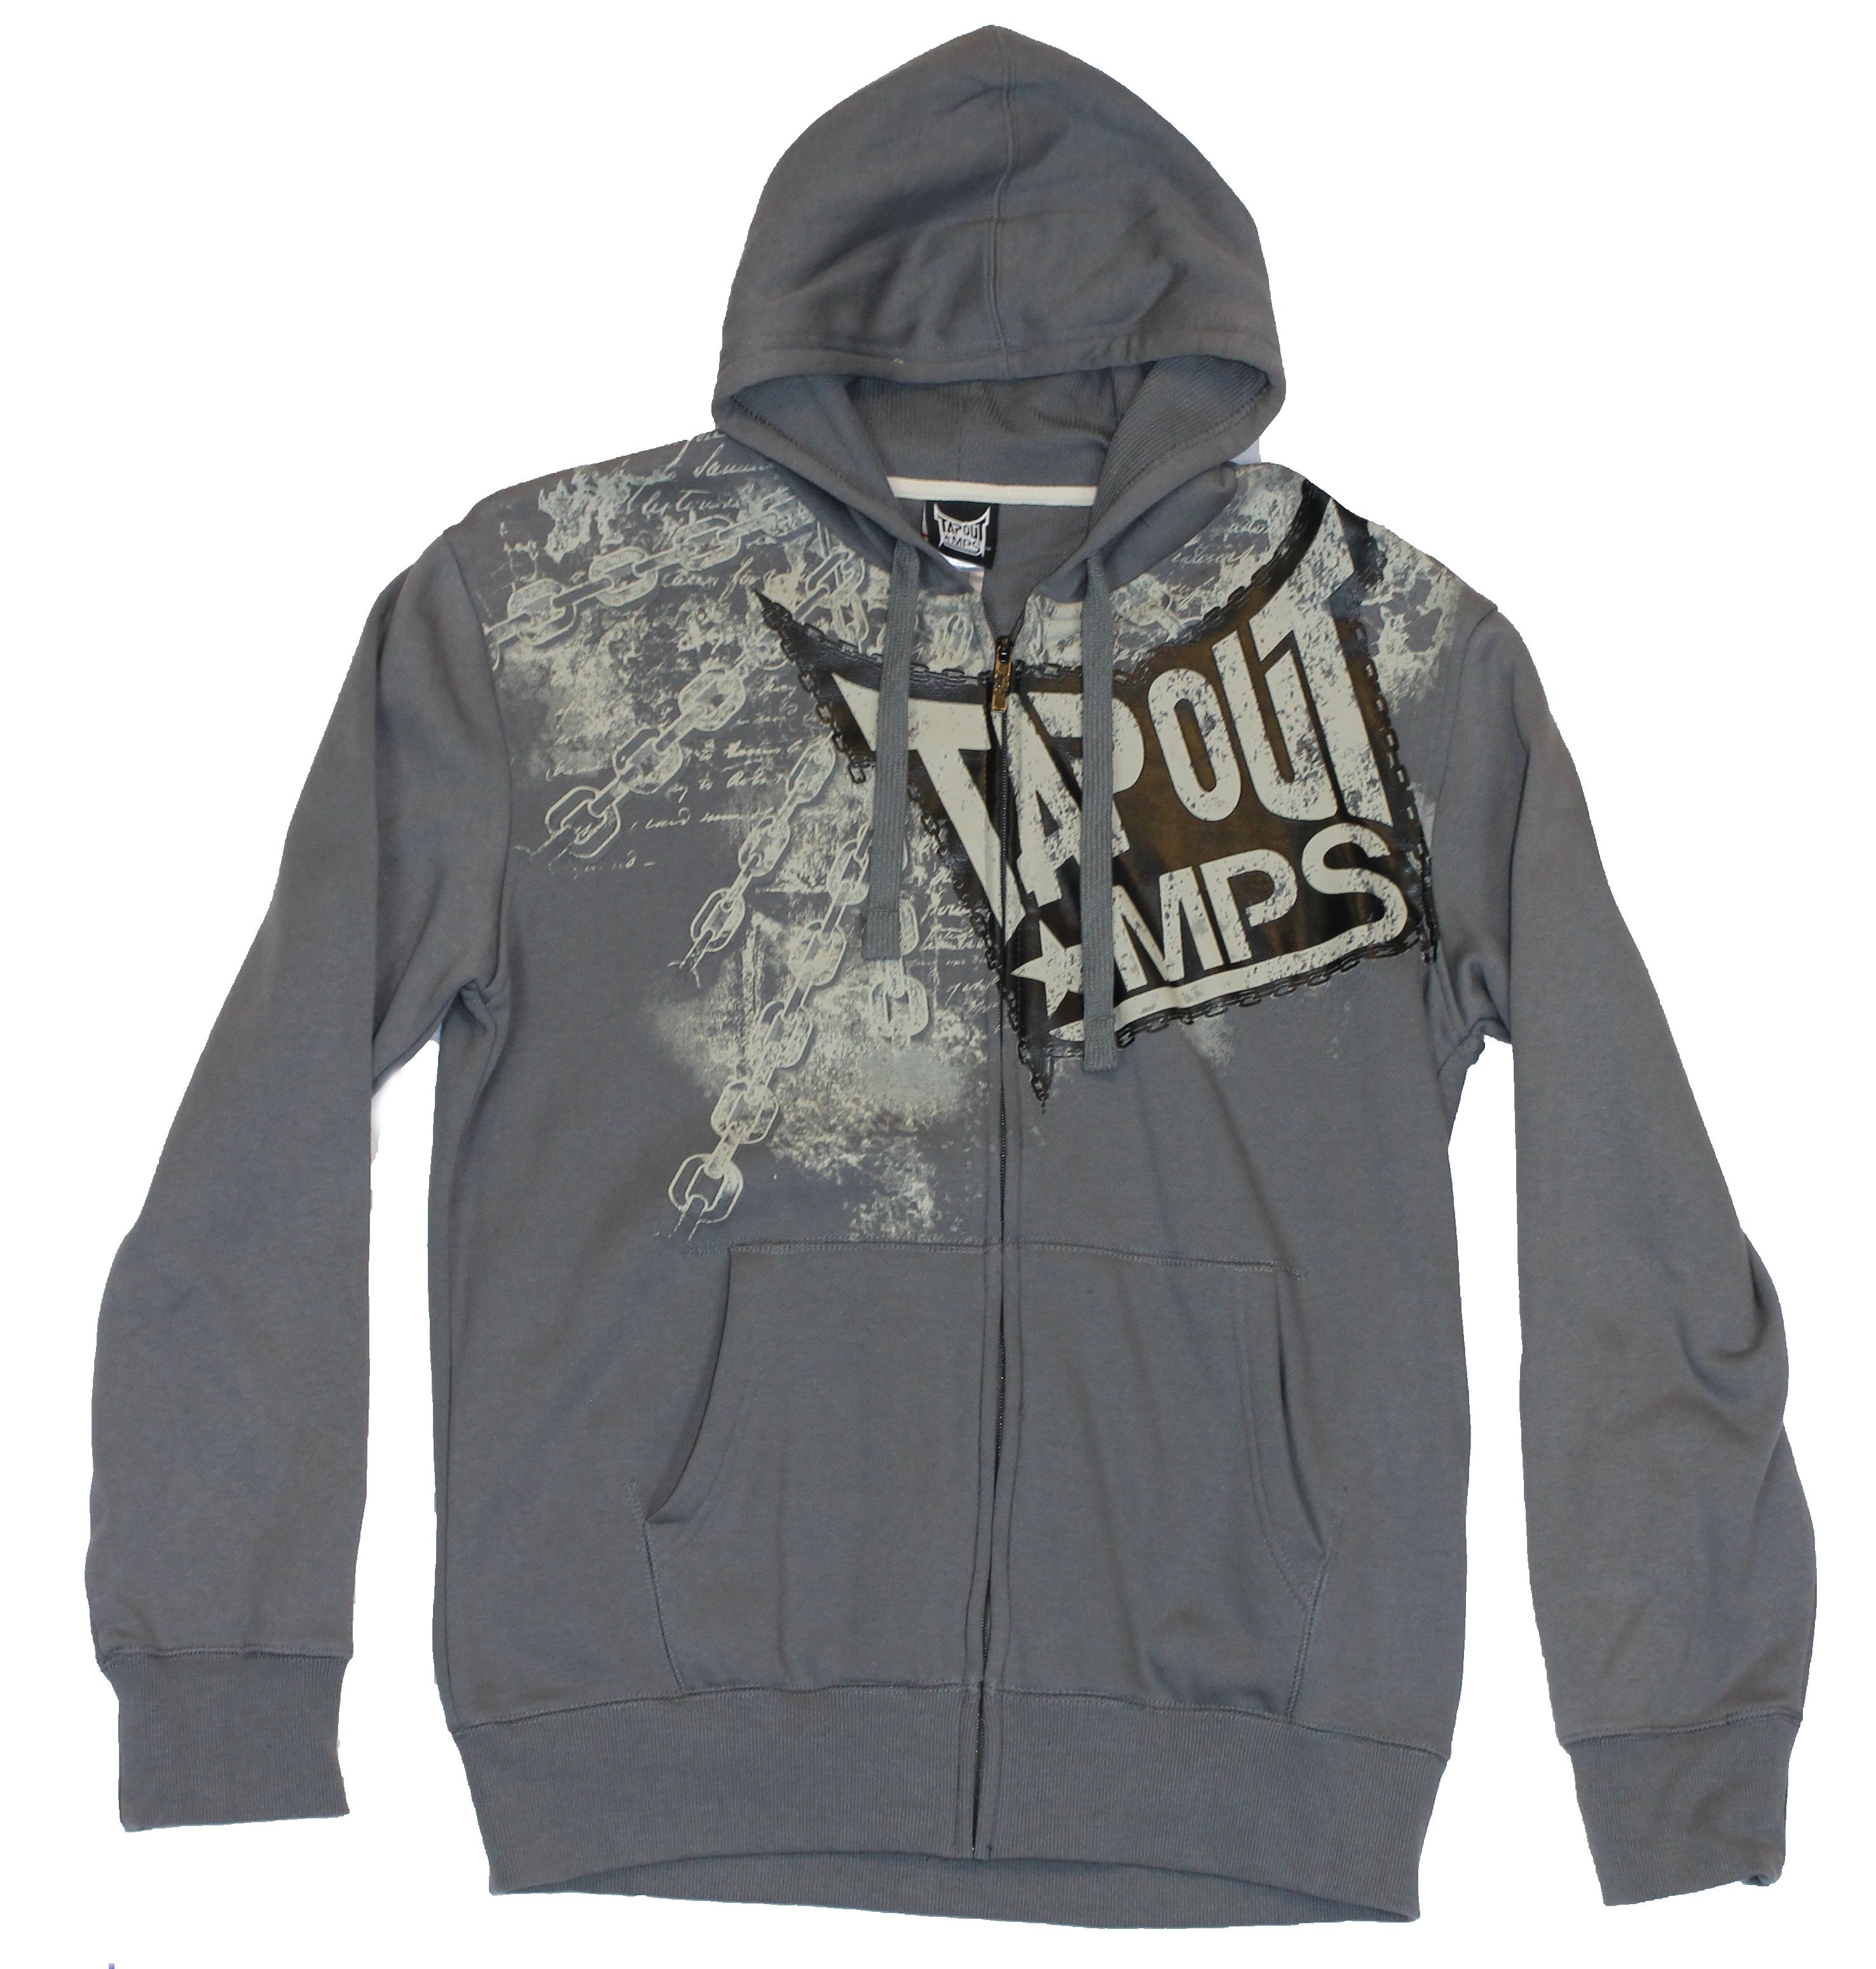 tapout zip up hoodie